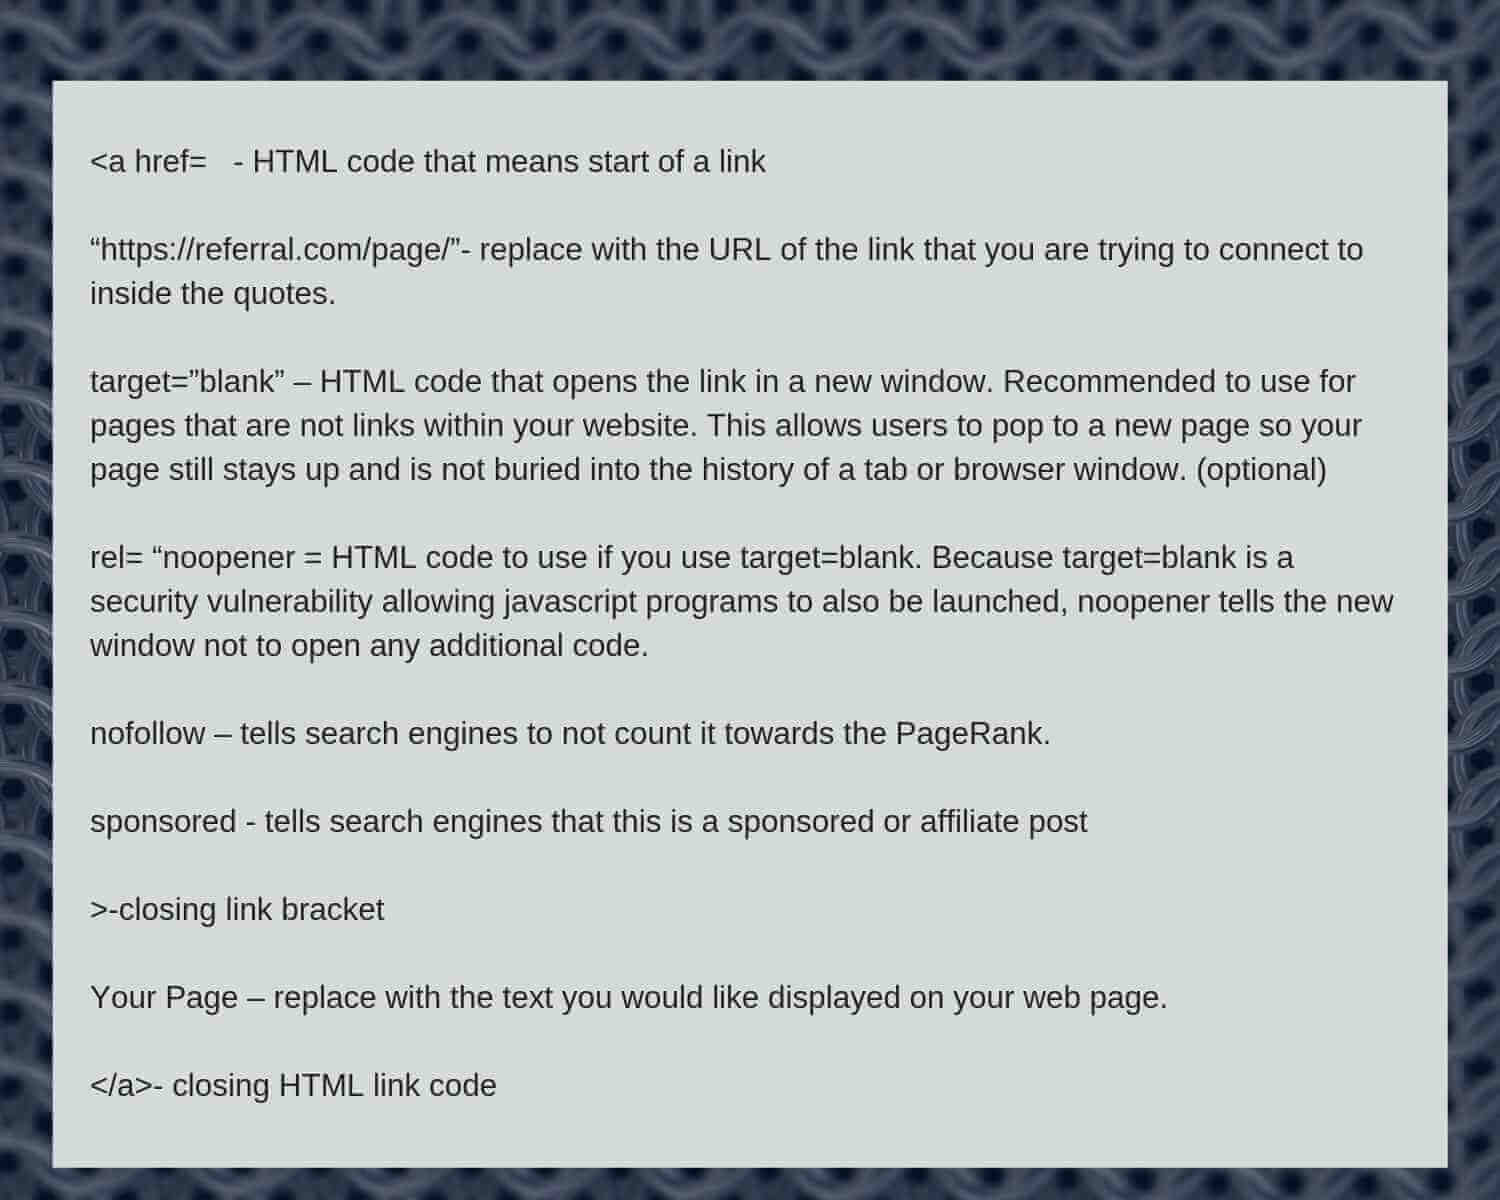 Google’s new nofollow link tags -break down of the html structure of a sponsored html link